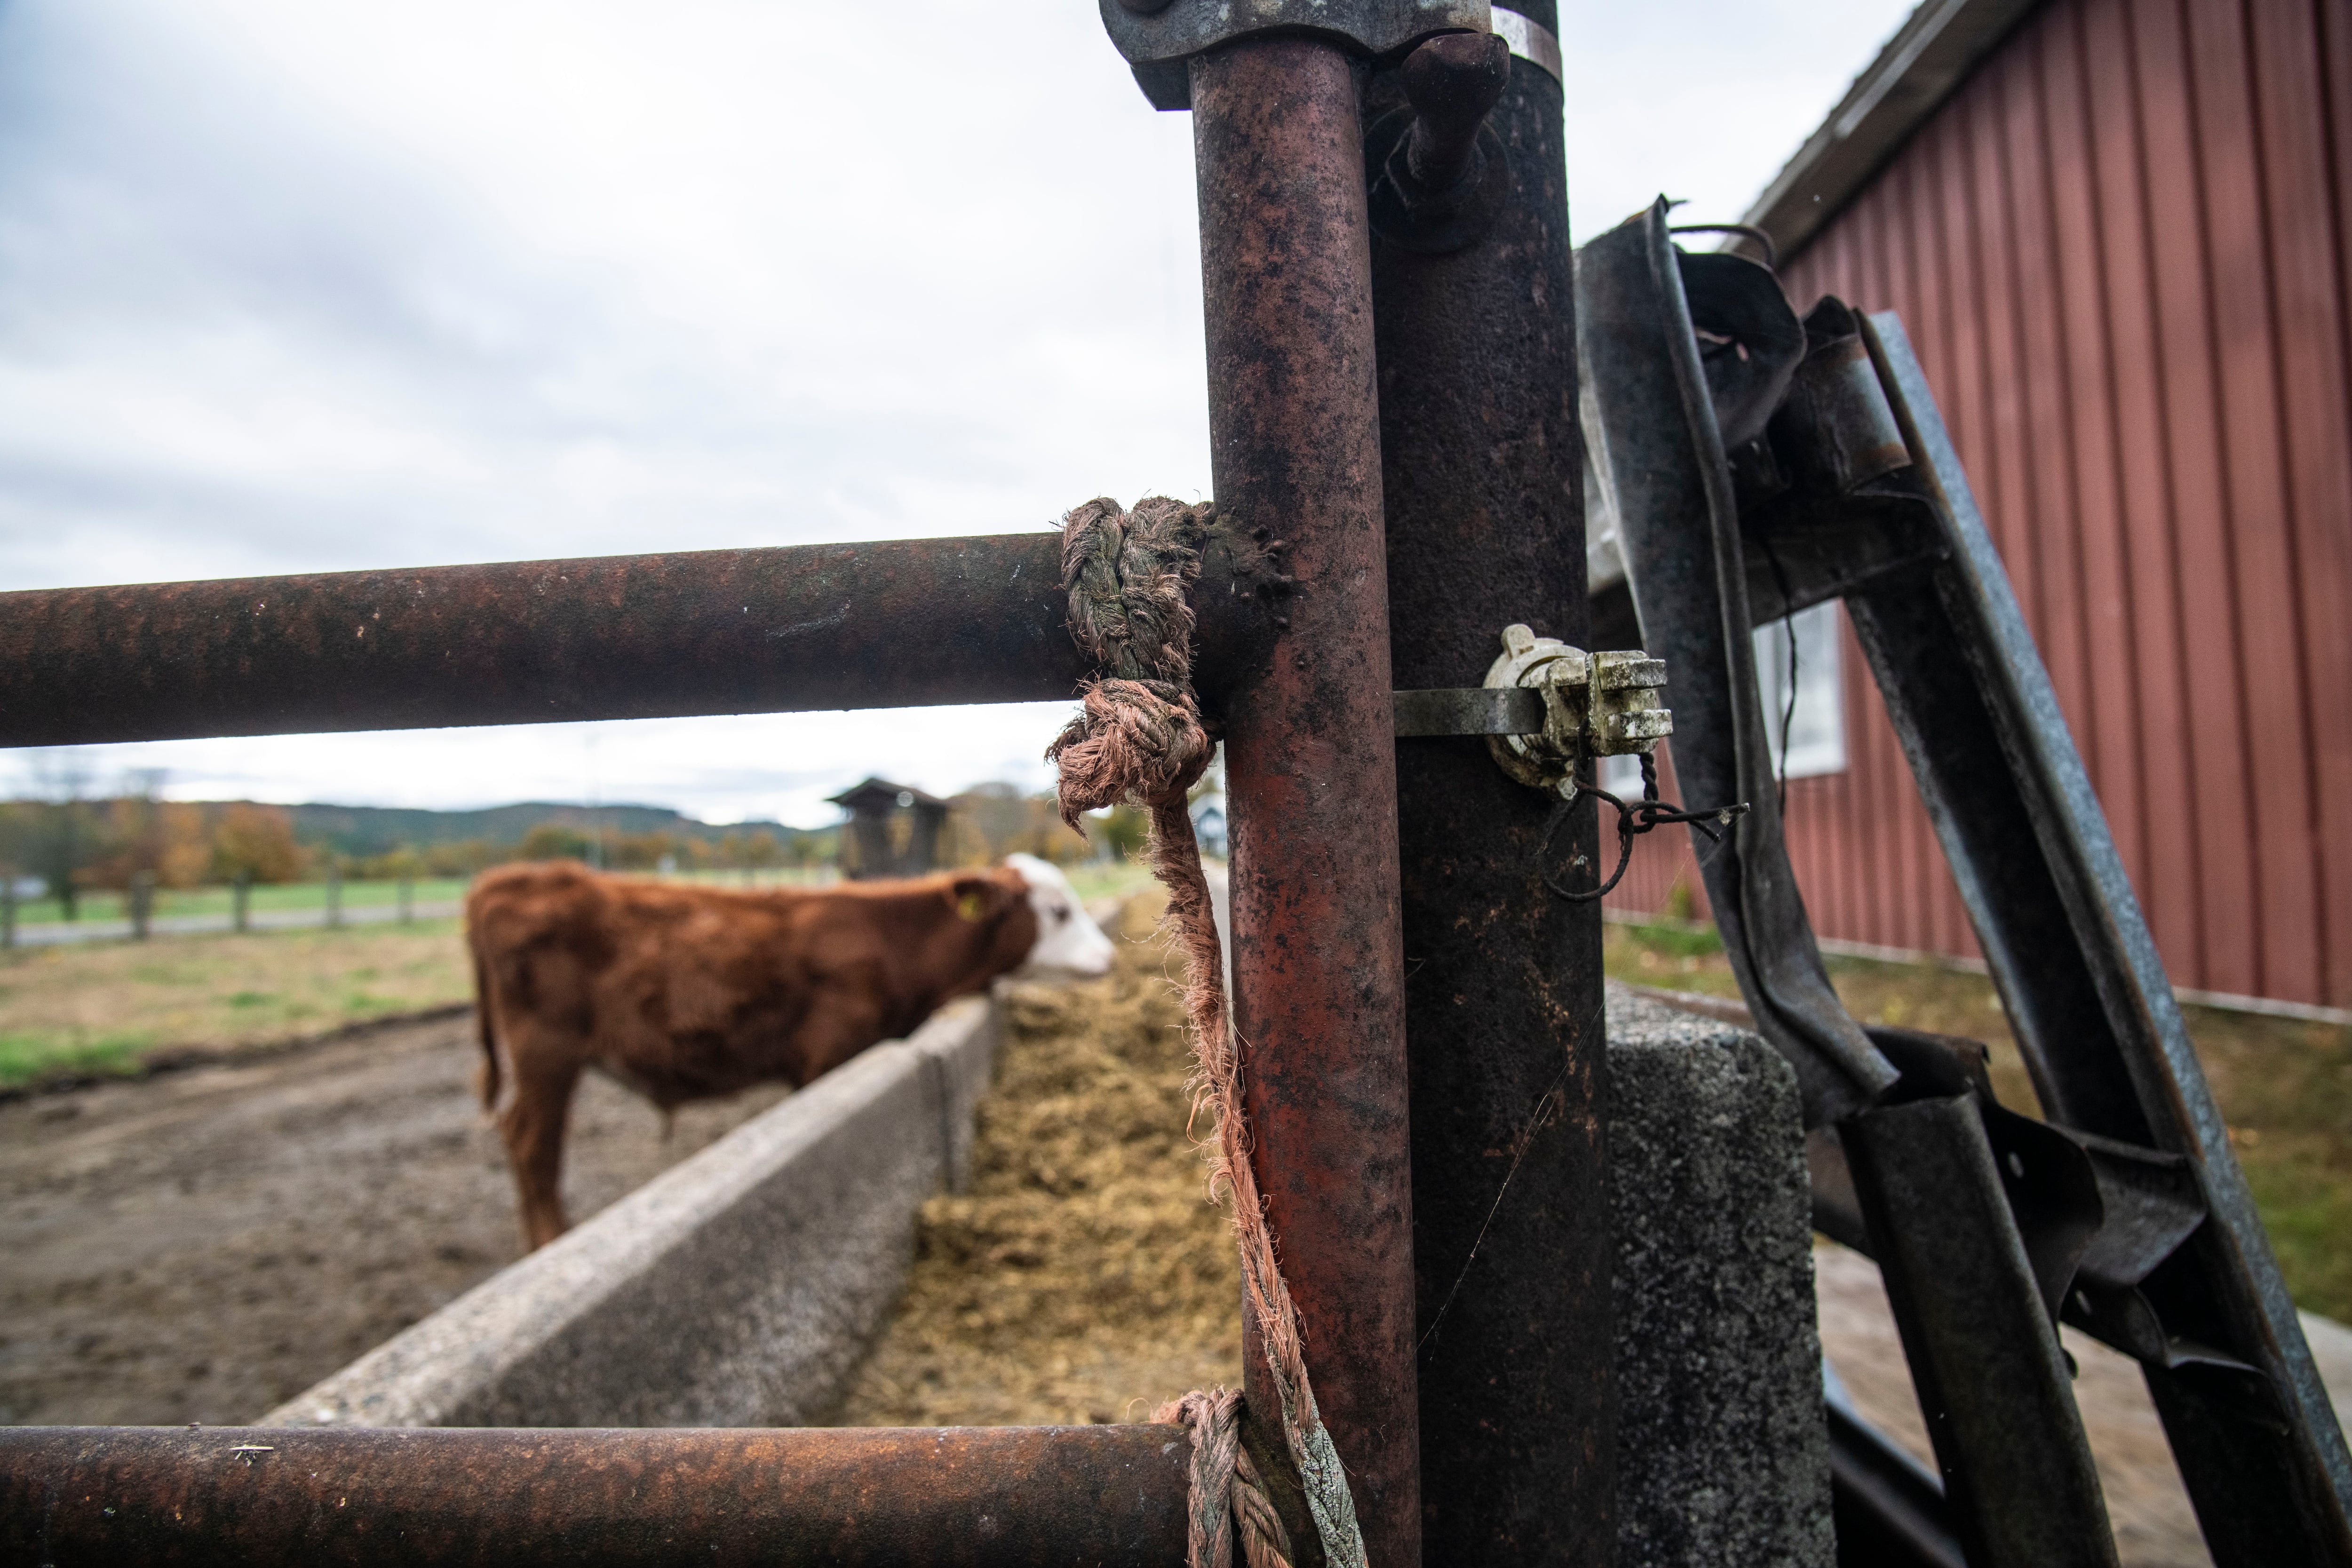 Eight states have a confirmed case of bird flu on dairy cattle herds. U.S. Department of Agriculture officials say wild migratory birds are the likely source of infection on the cattle.